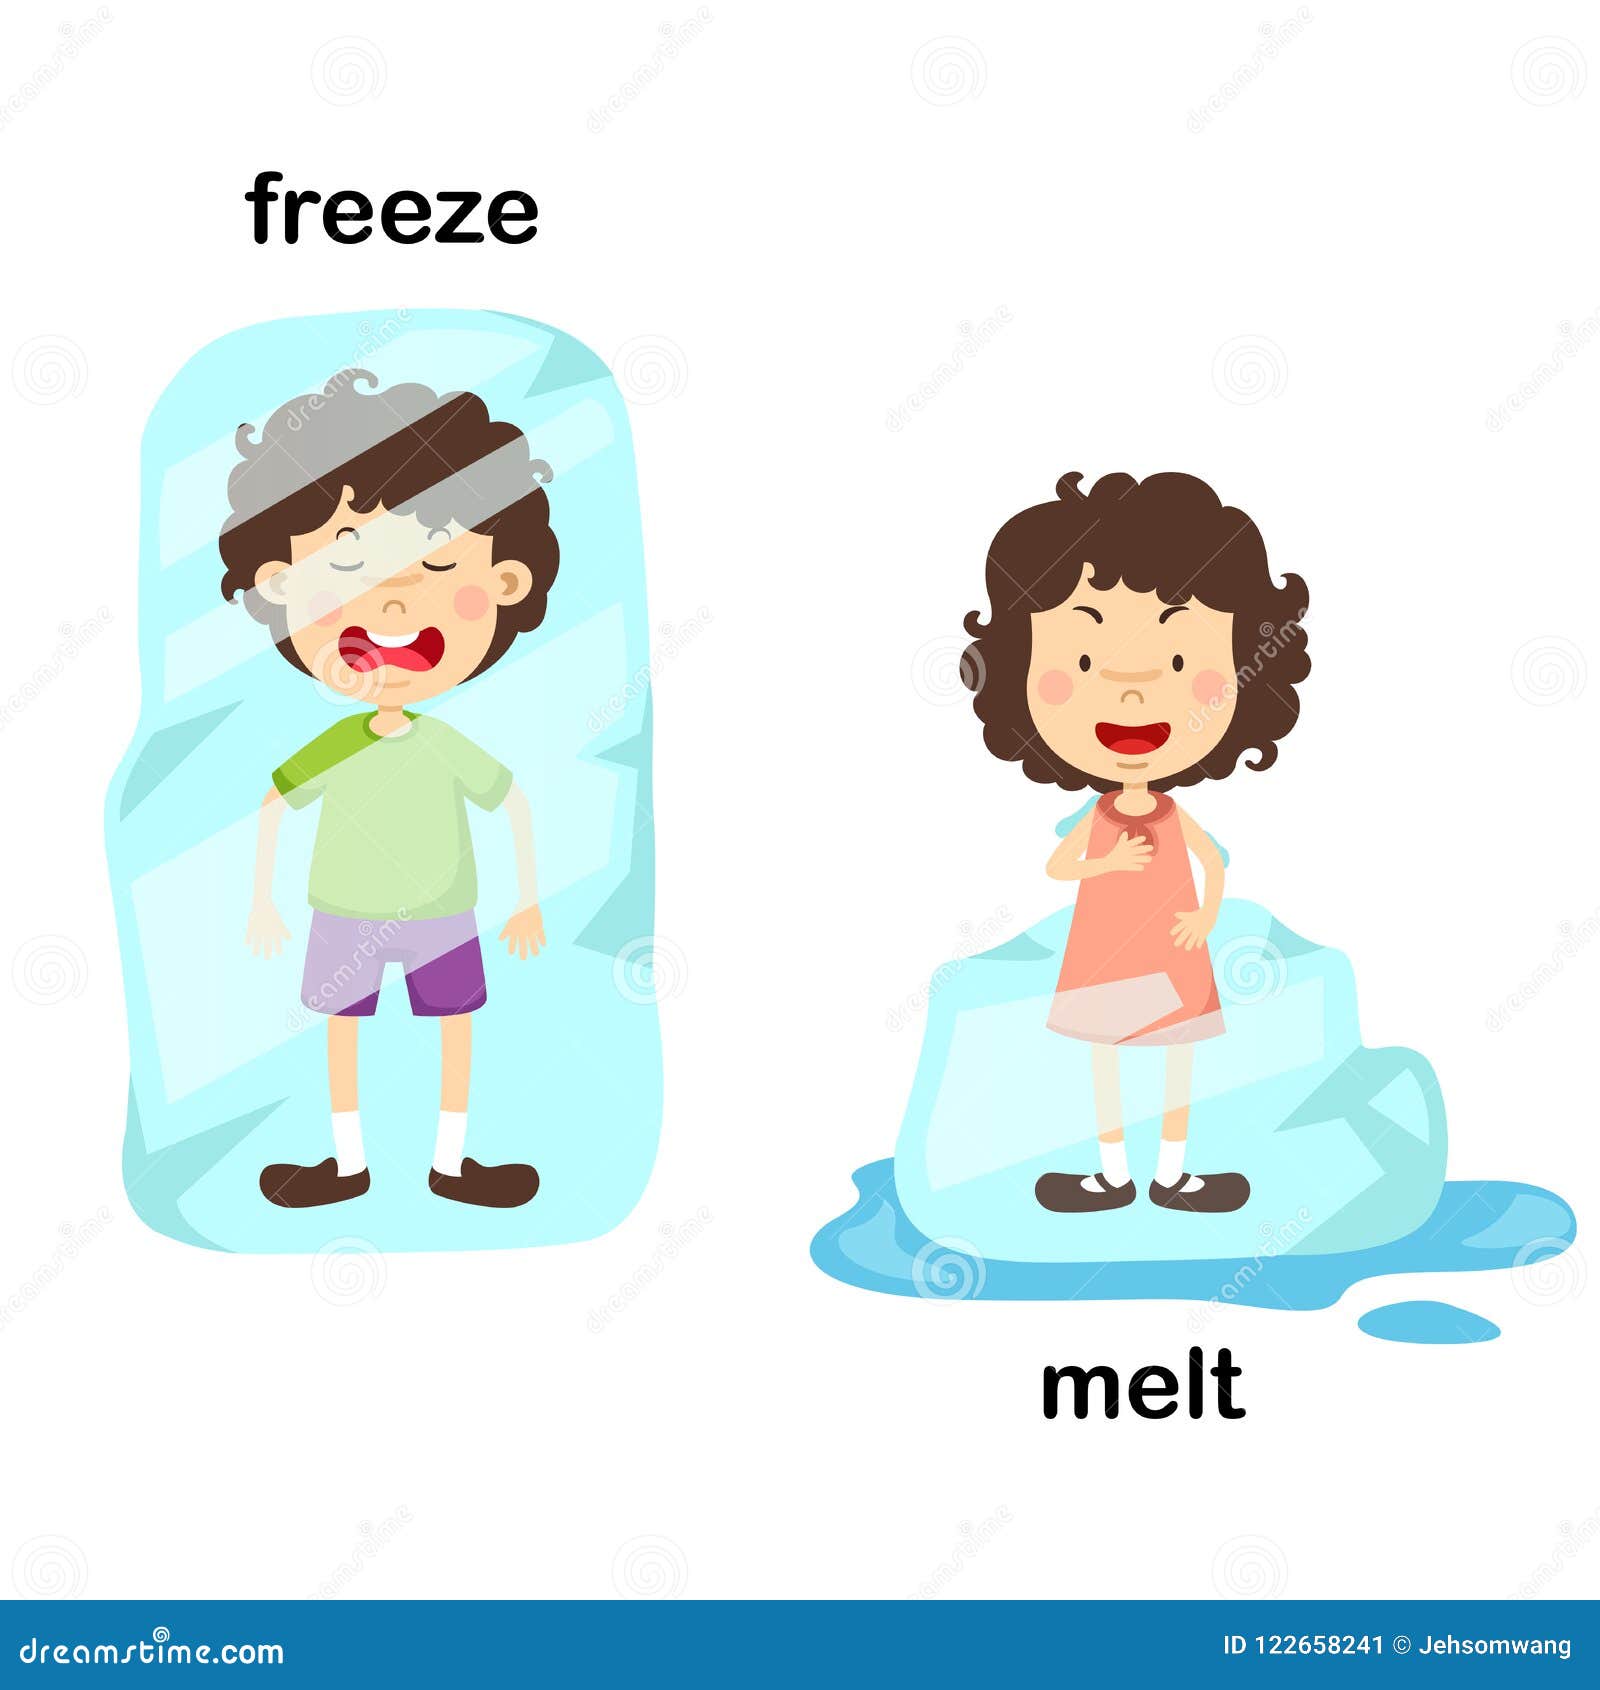 opposite freeze and melt